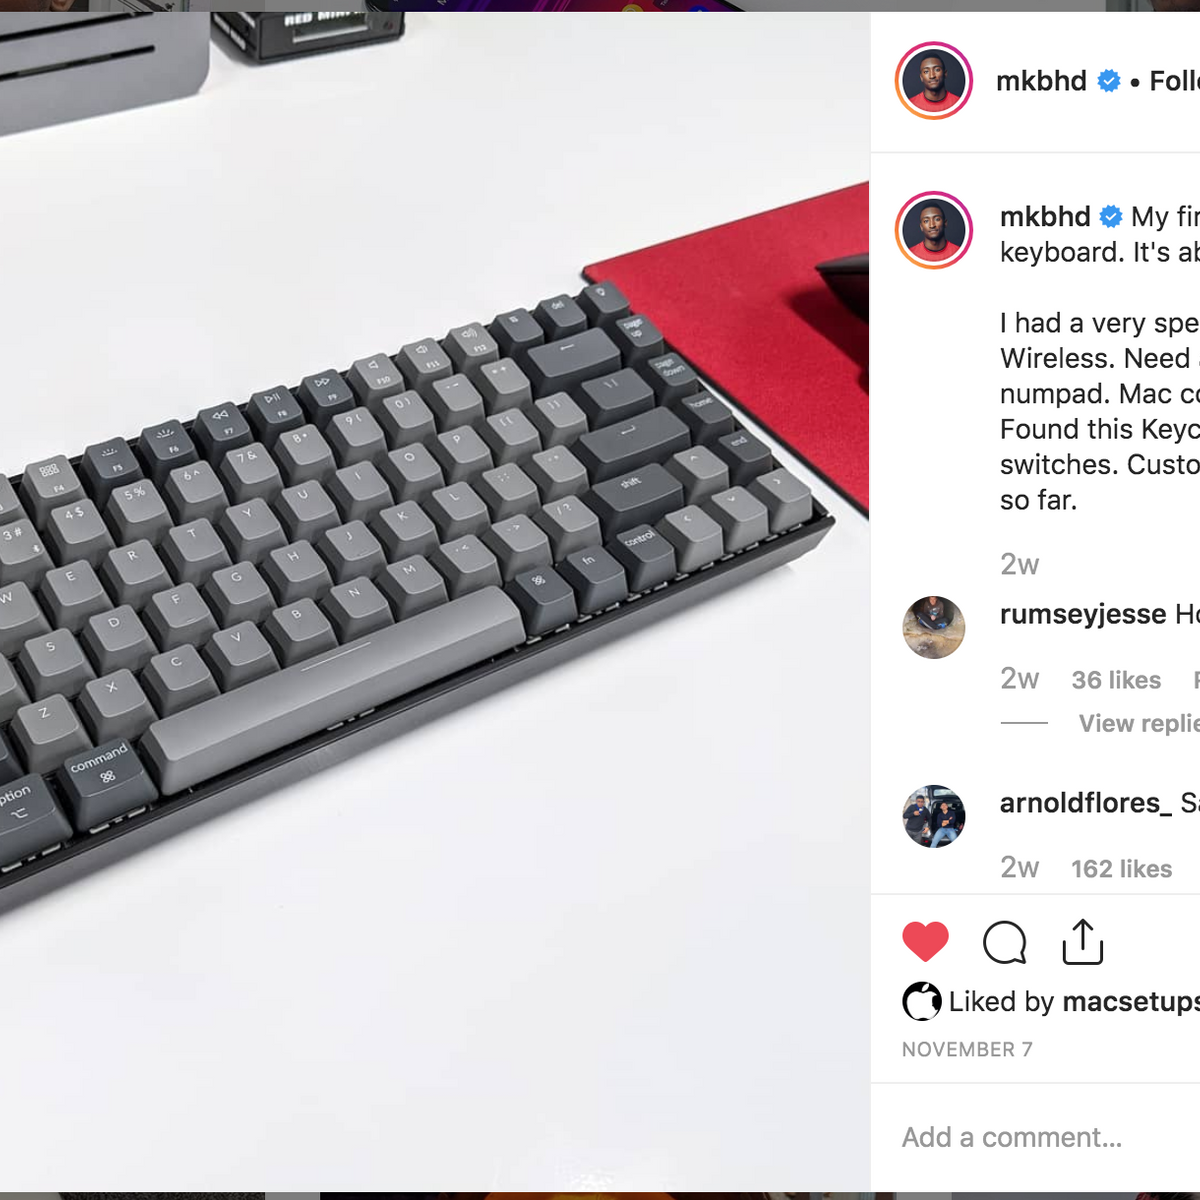 The famous @mkbhd aka Marques Brownlee's first K2 – Keychron